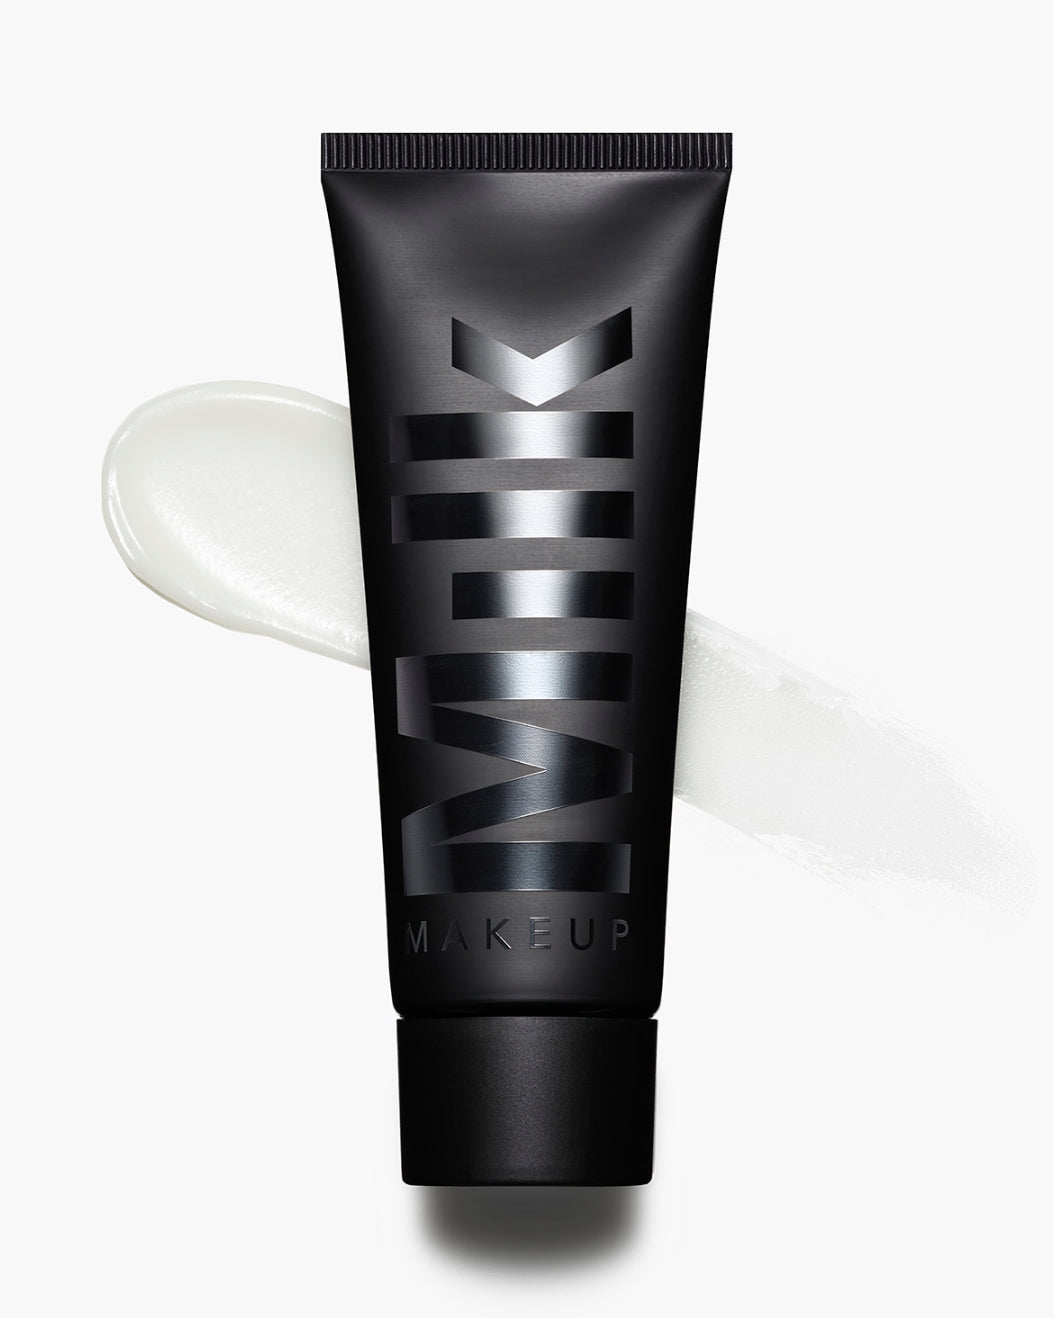 Image of Milk Makeup Pore Eclipse Primer with a swipe of the product behind it on a white background